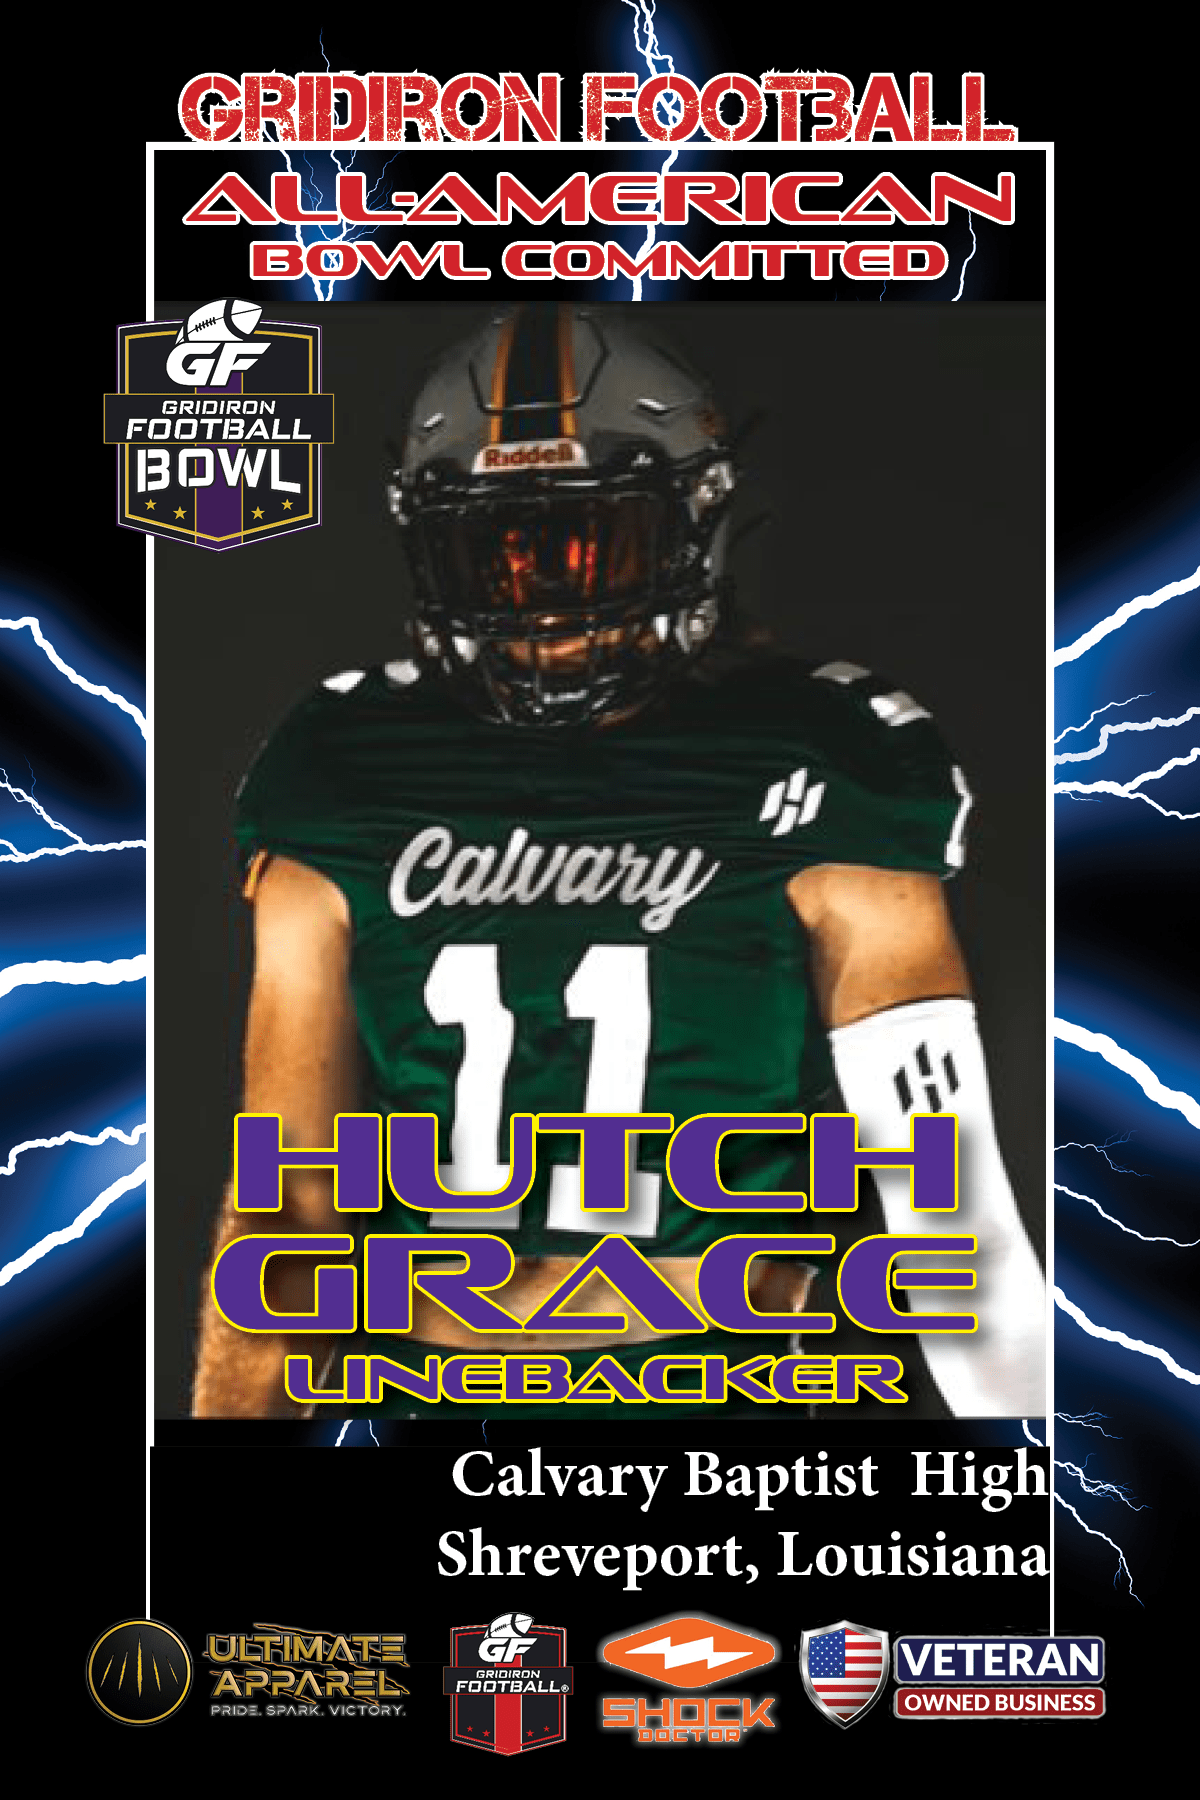 BREAKING NEWS: Calvary Baptist Academy (Shreveport, La.) LB Hutch Grace has committed to the 2023 Gridiron Football All-American Bowl